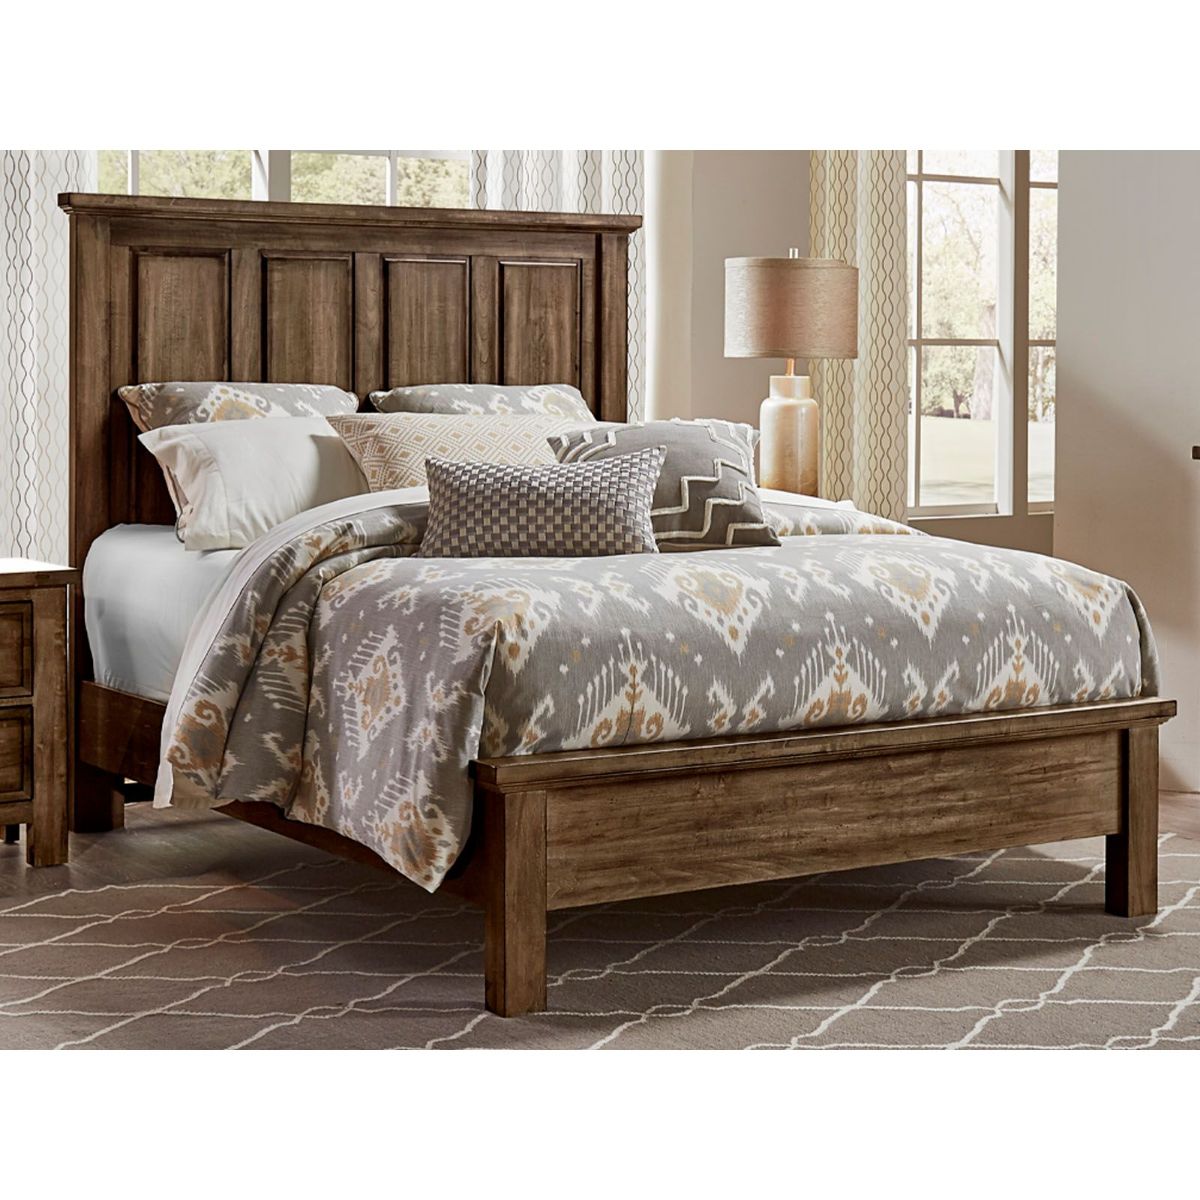 Picture of Maple Road Solid Maple Queen Bed